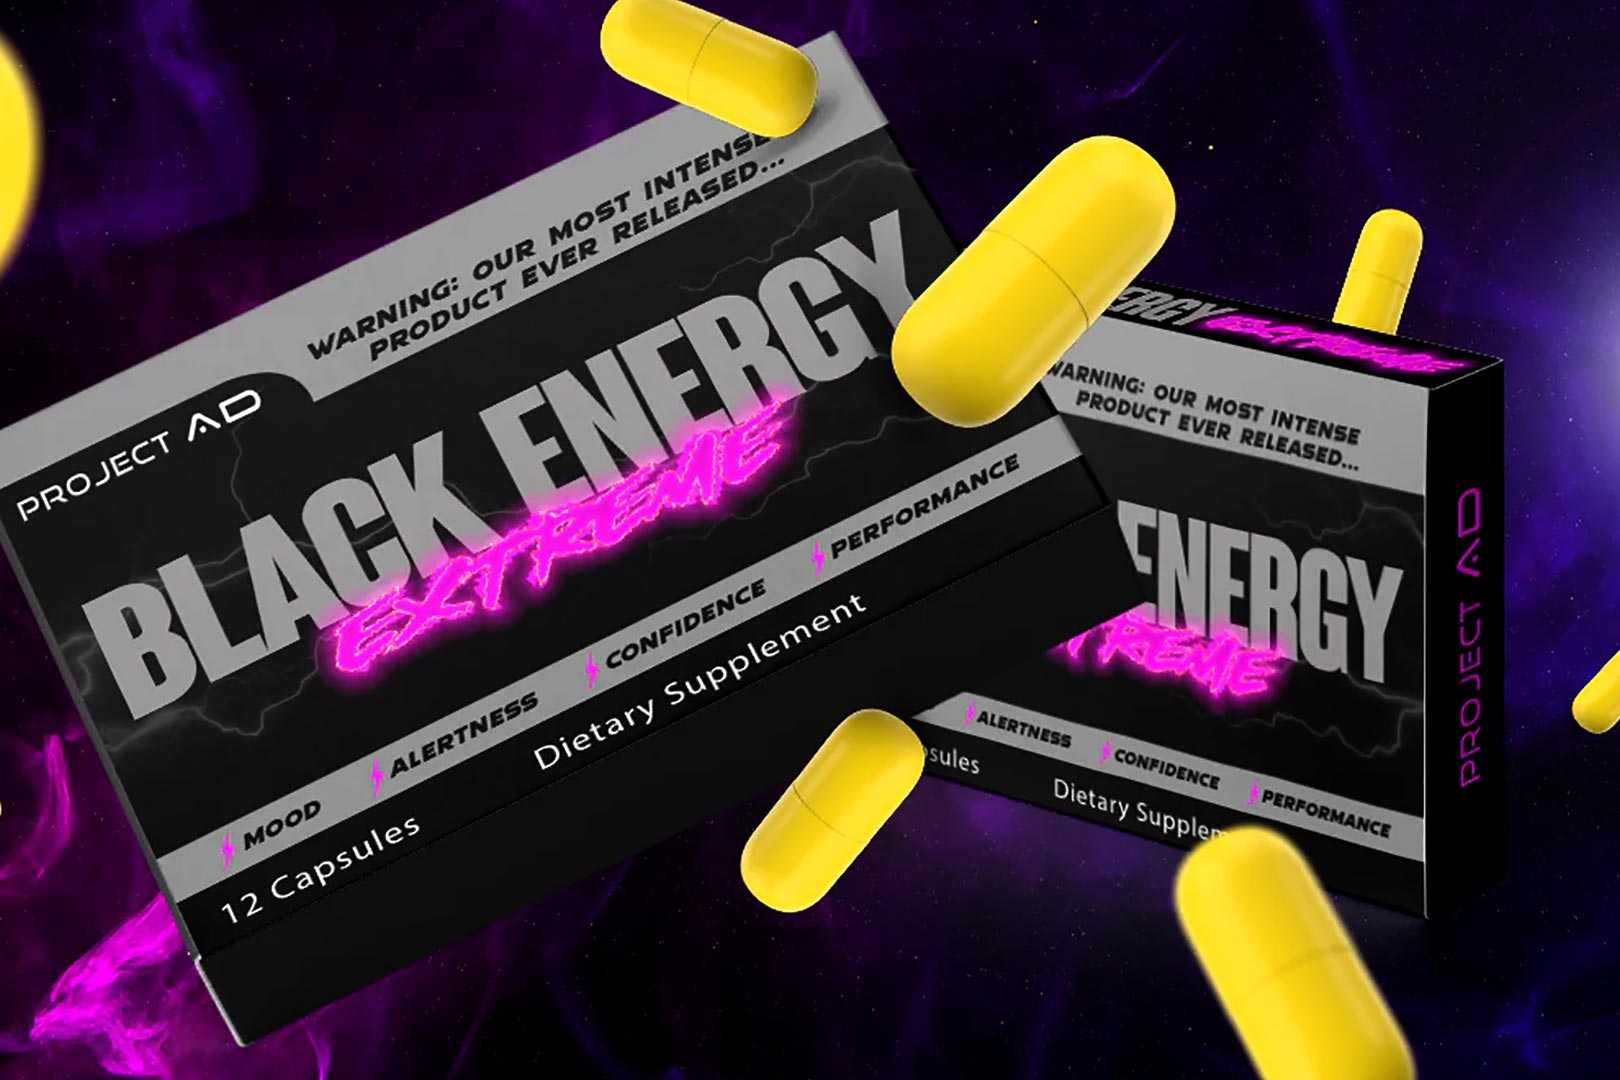 Project Ad Black Energy Extreme